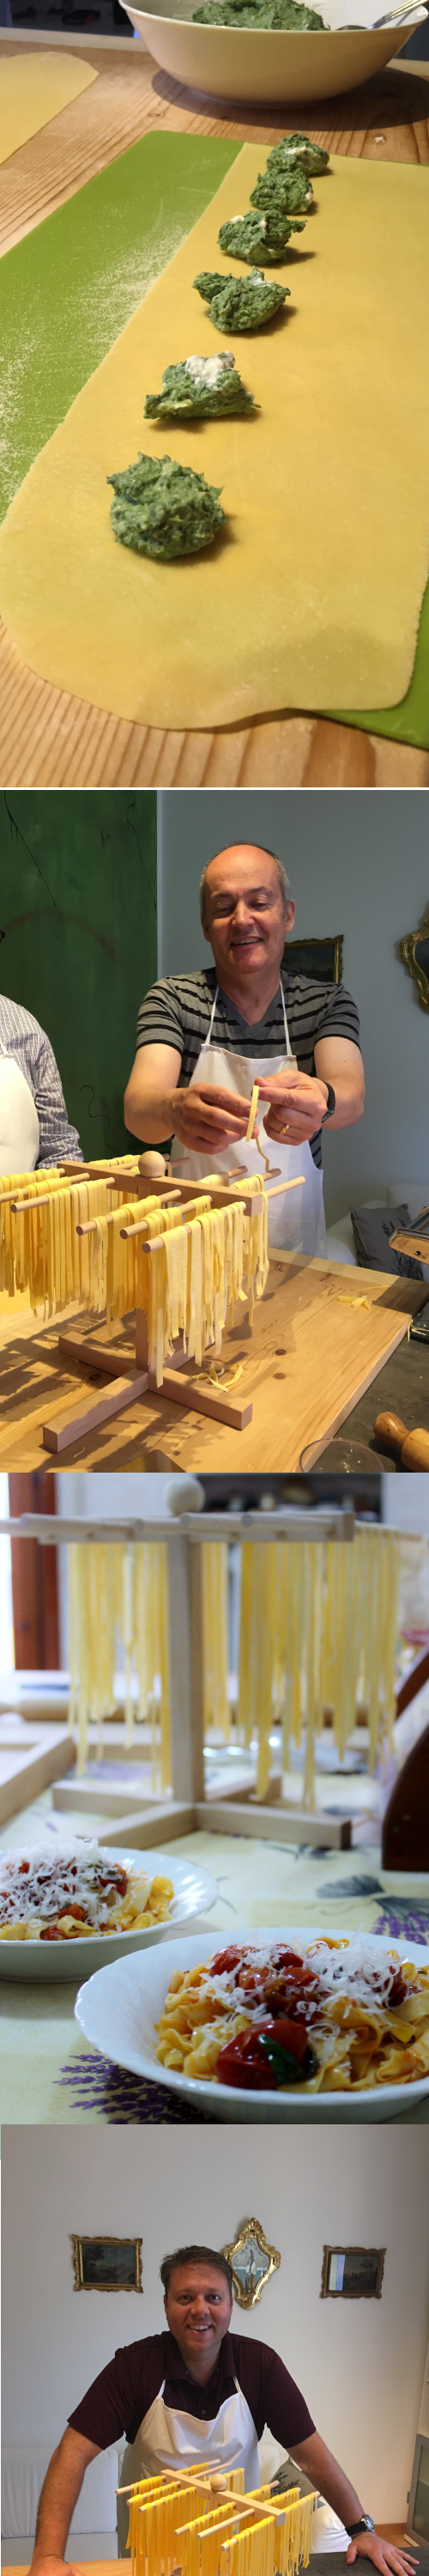 Week Long Gluten Free Cooking Courses in Italy